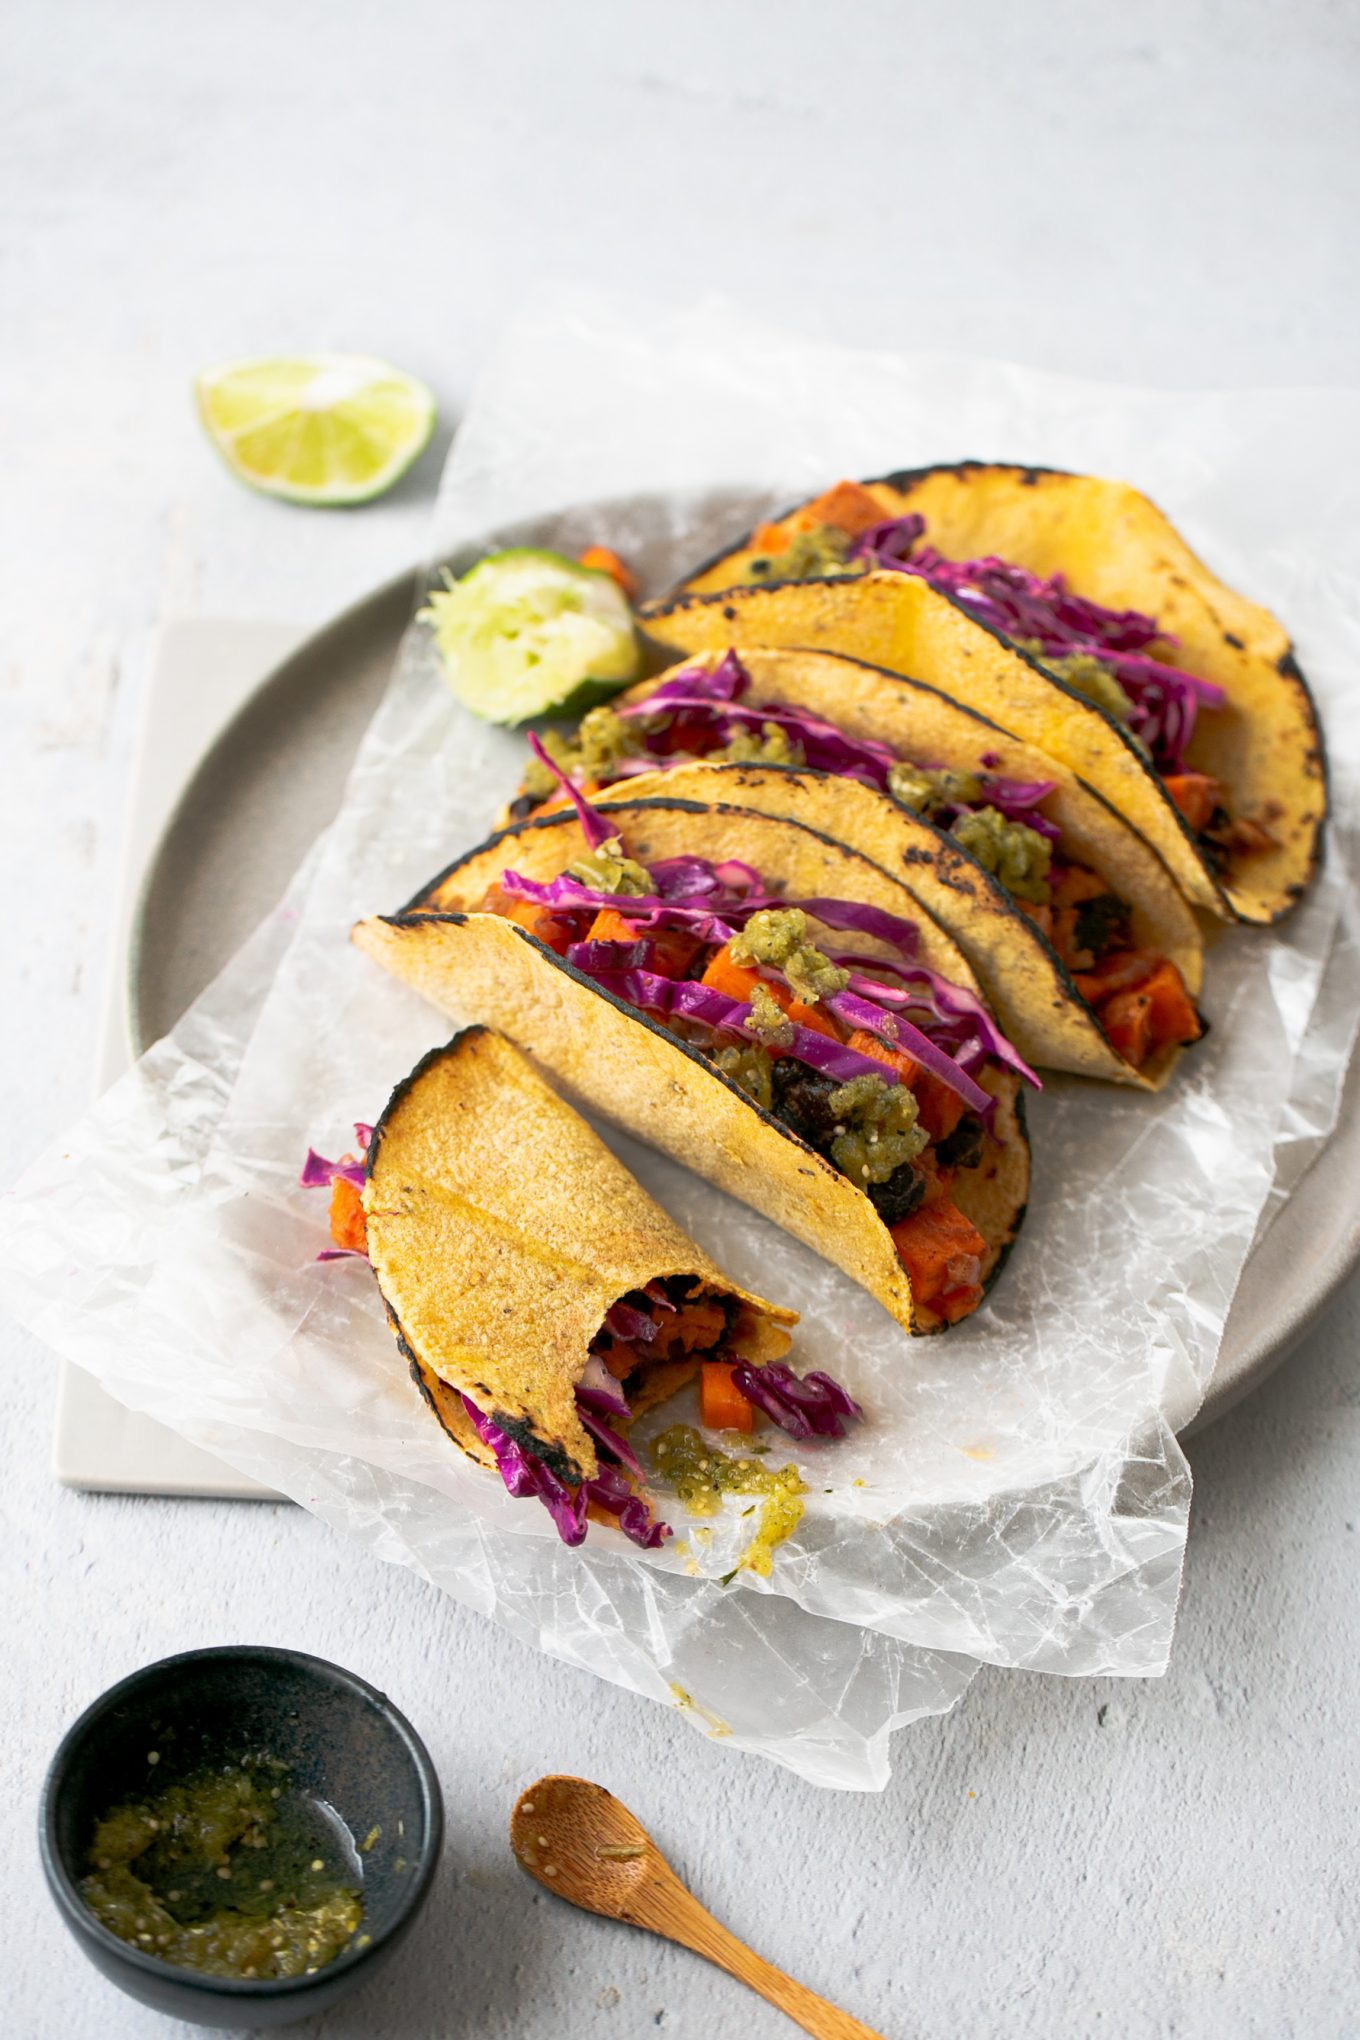 Vegan tacos with black beans and sweet potatoes topped with red cabbage and salsa verde